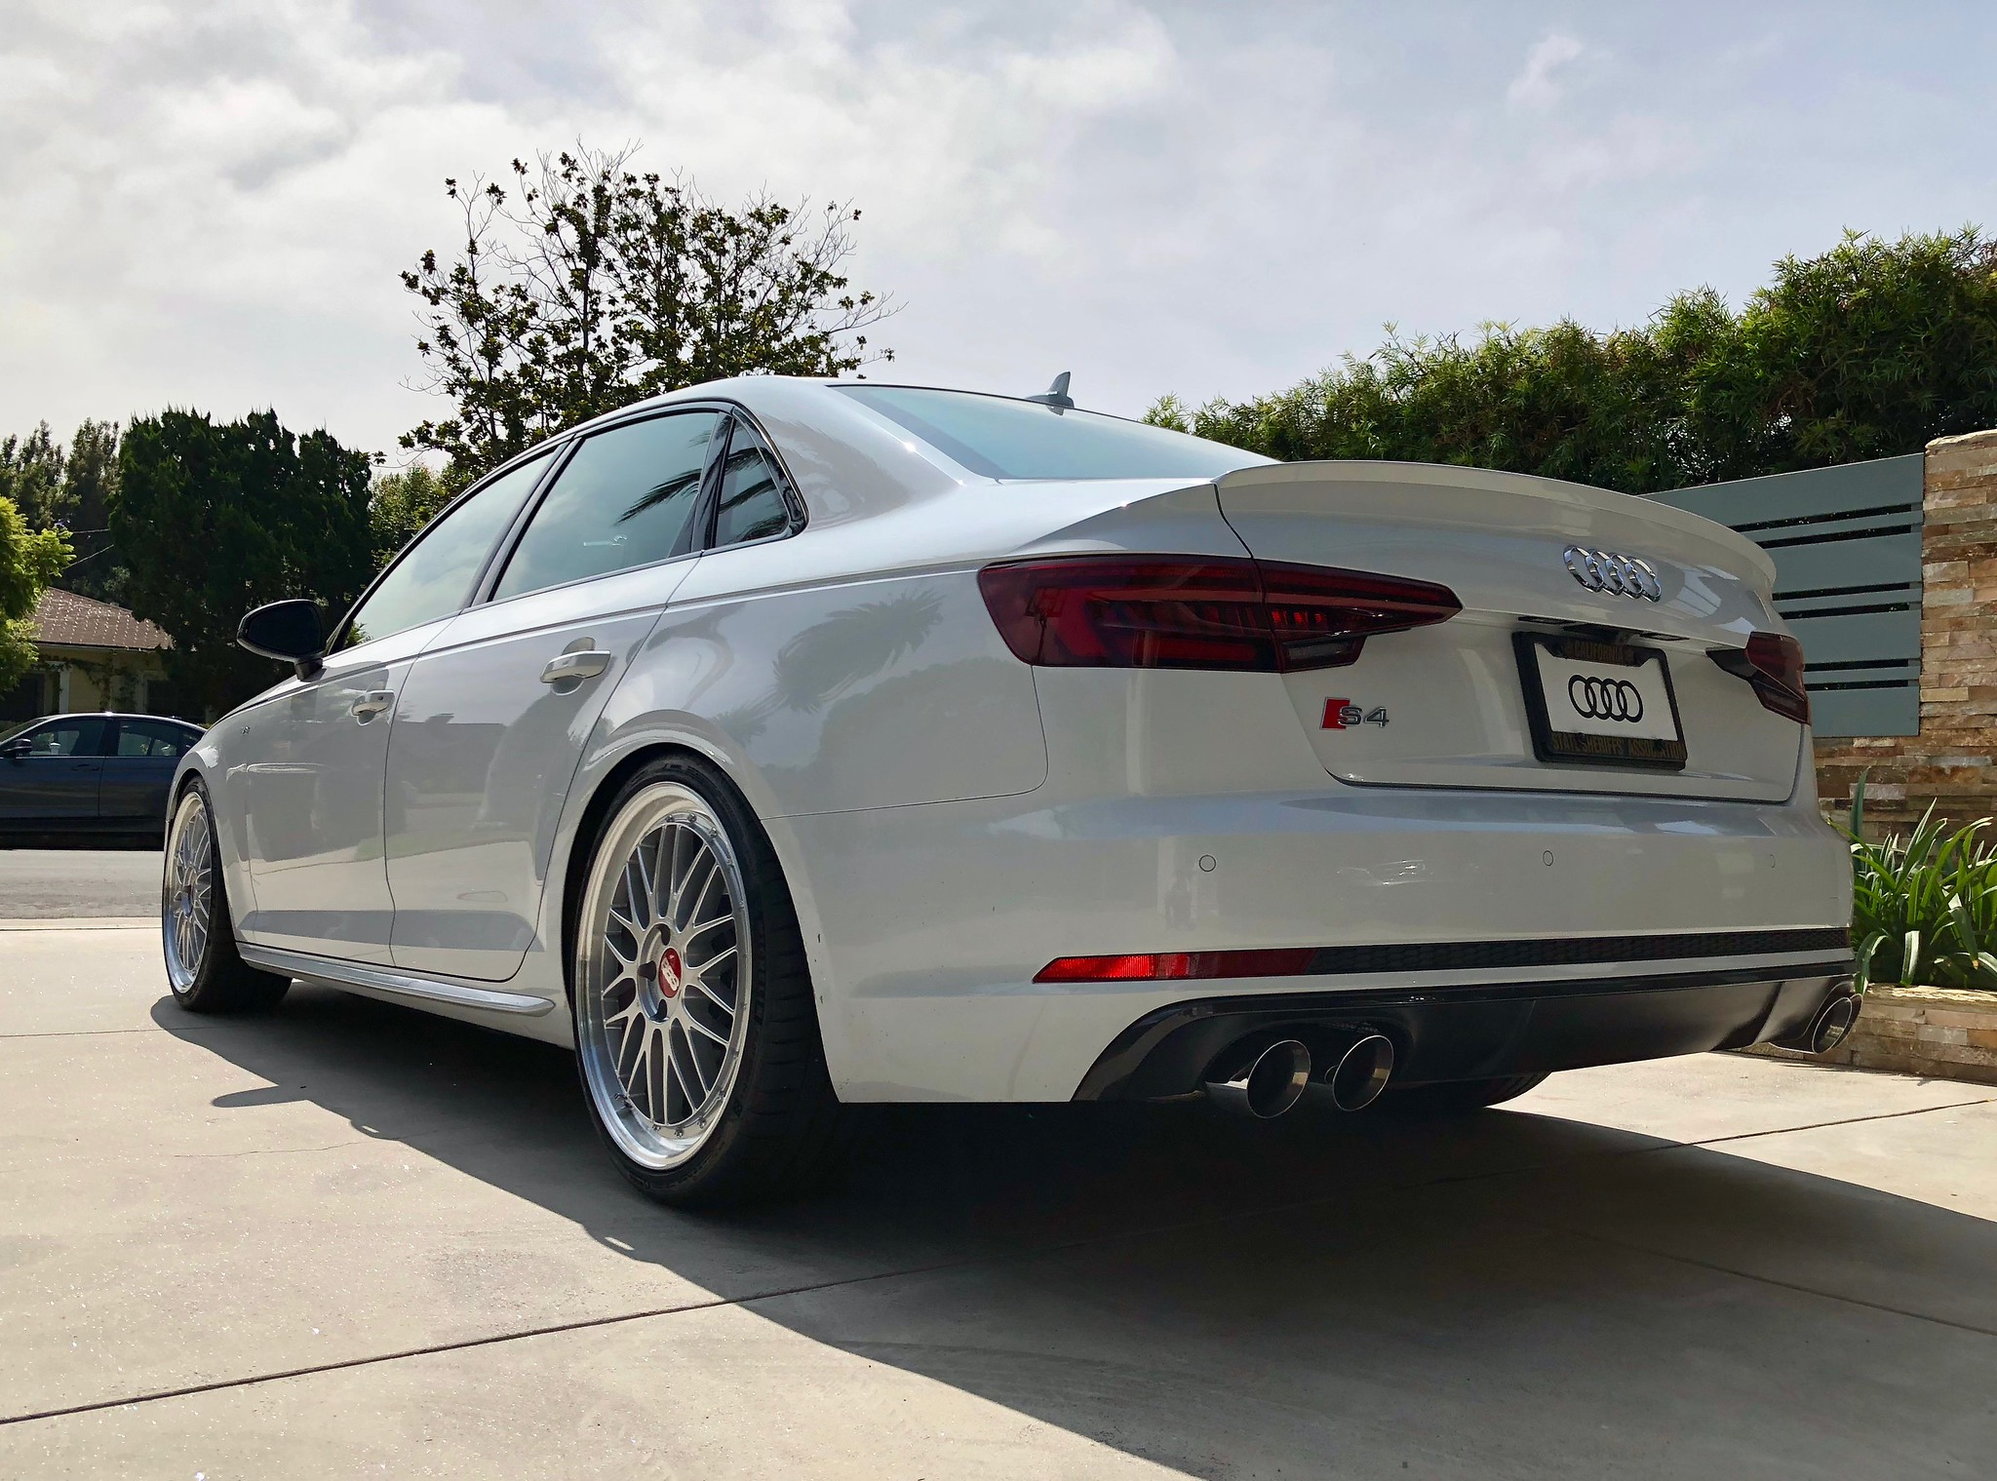 2018 Audi S4 - B9 S4 Part Out - Wheels/Tires, AWE Touring Exhaust, & KW HAS Springs - Los Angeles, CA 90066, United States